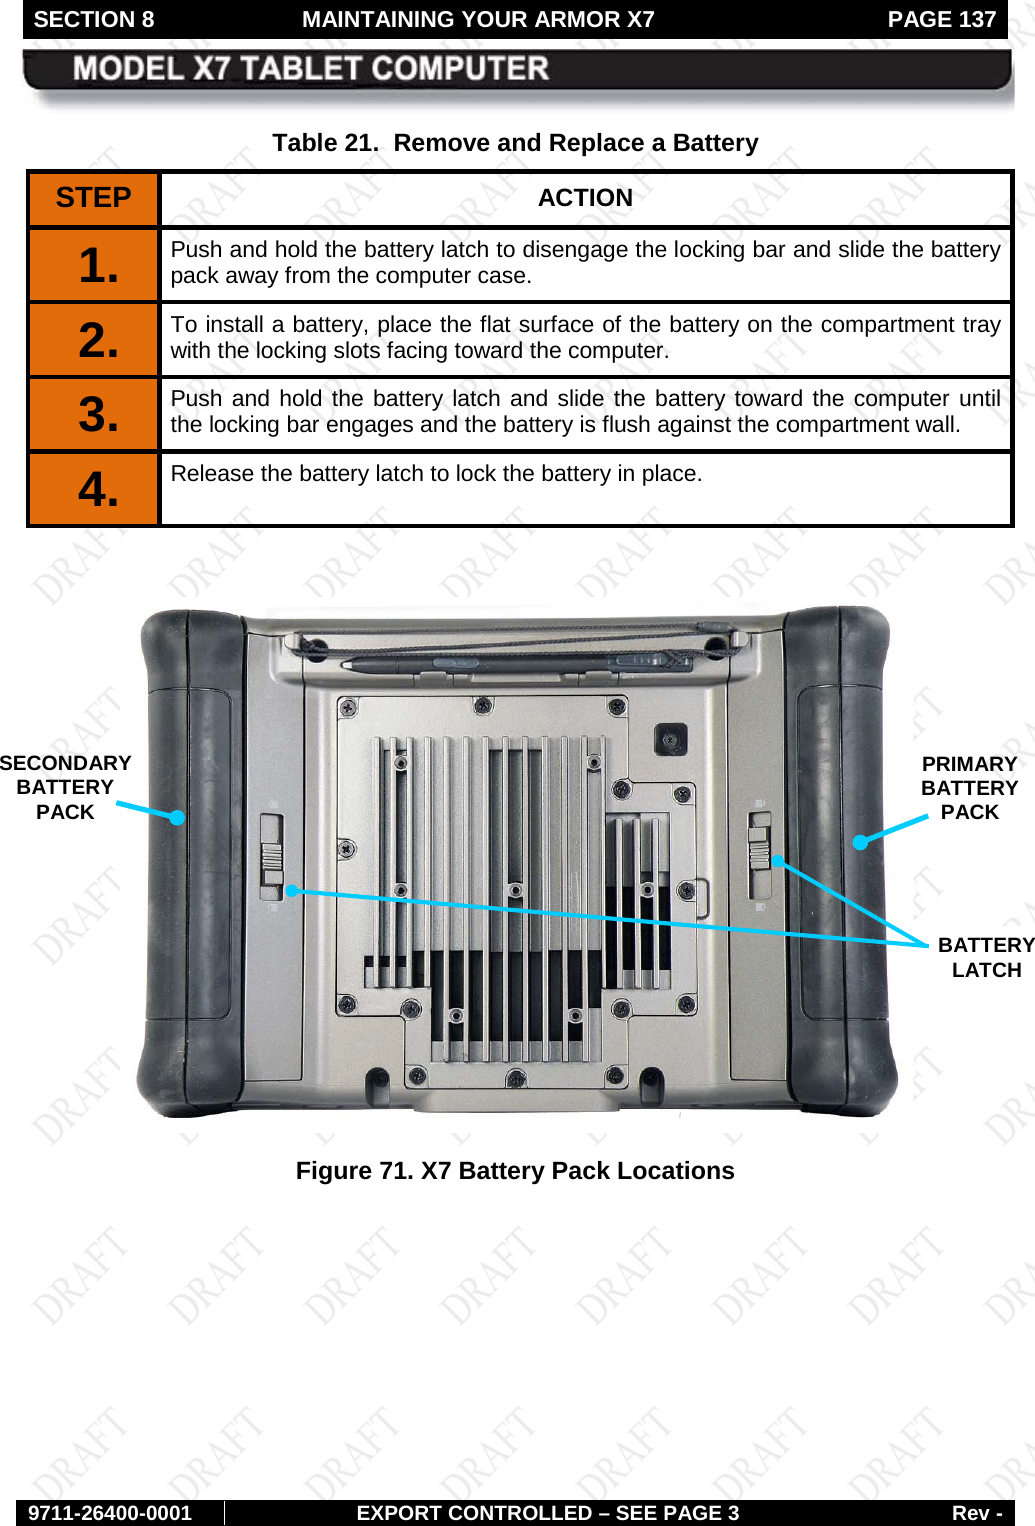 SECTION 8 MAINTAINING YOUR ARMOR X7  PAGE 137        9711-26400-0001 EXPORT CONTROLLED – SEE PAGE 3 Rev - Table 21.  Remove and Replace a Battery STEP  ACTION 1.  Push and hold the battery latch to disengage the locking bar and slide the battery pack away from the computer case.  2.  To install a battery, place the flat surface of the battery on the compartment tray with the locking slots facing toward the computer. 3.  Push and hold the battery latch and slide the battery toward the computer until the locking bar engages and the battery is flush against the compartment wall. 4.  Release the battery latch to lock the battery in place.   Figure 71. X7 Battery Pack Locations    BATTERY  LATCH  SECONDARY BATTERY PACK  PRIMARYBATTERY PACK  